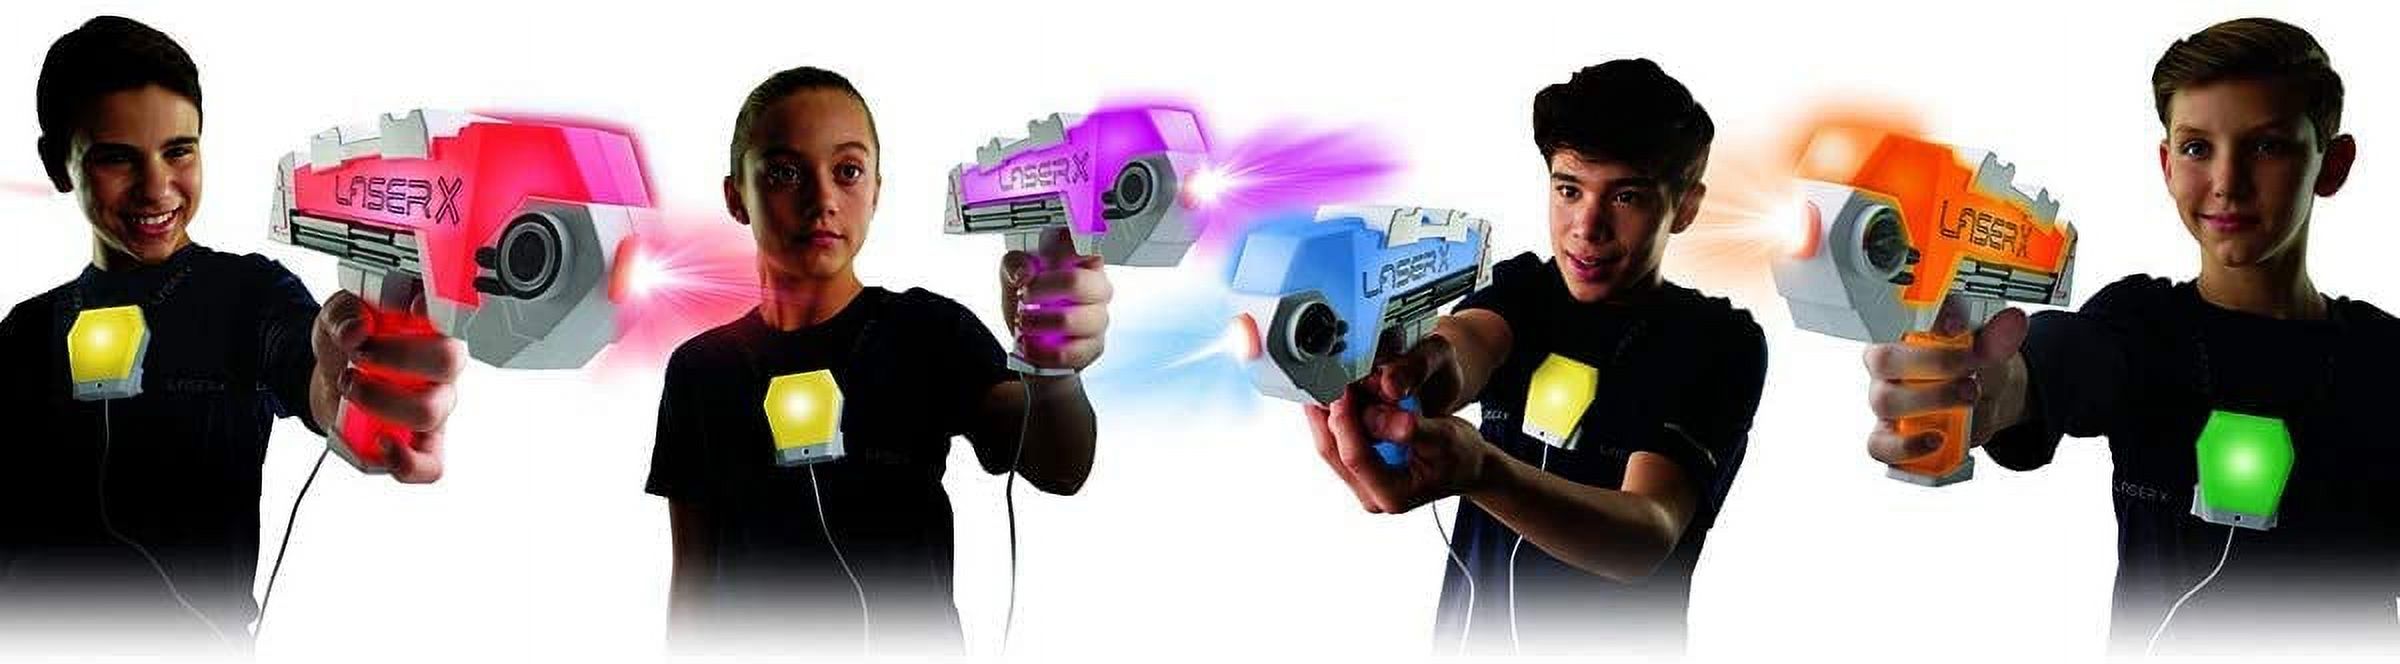 Laser X Laser Gaming Blasters with Batteries, 4 Pack - image 3 of 7